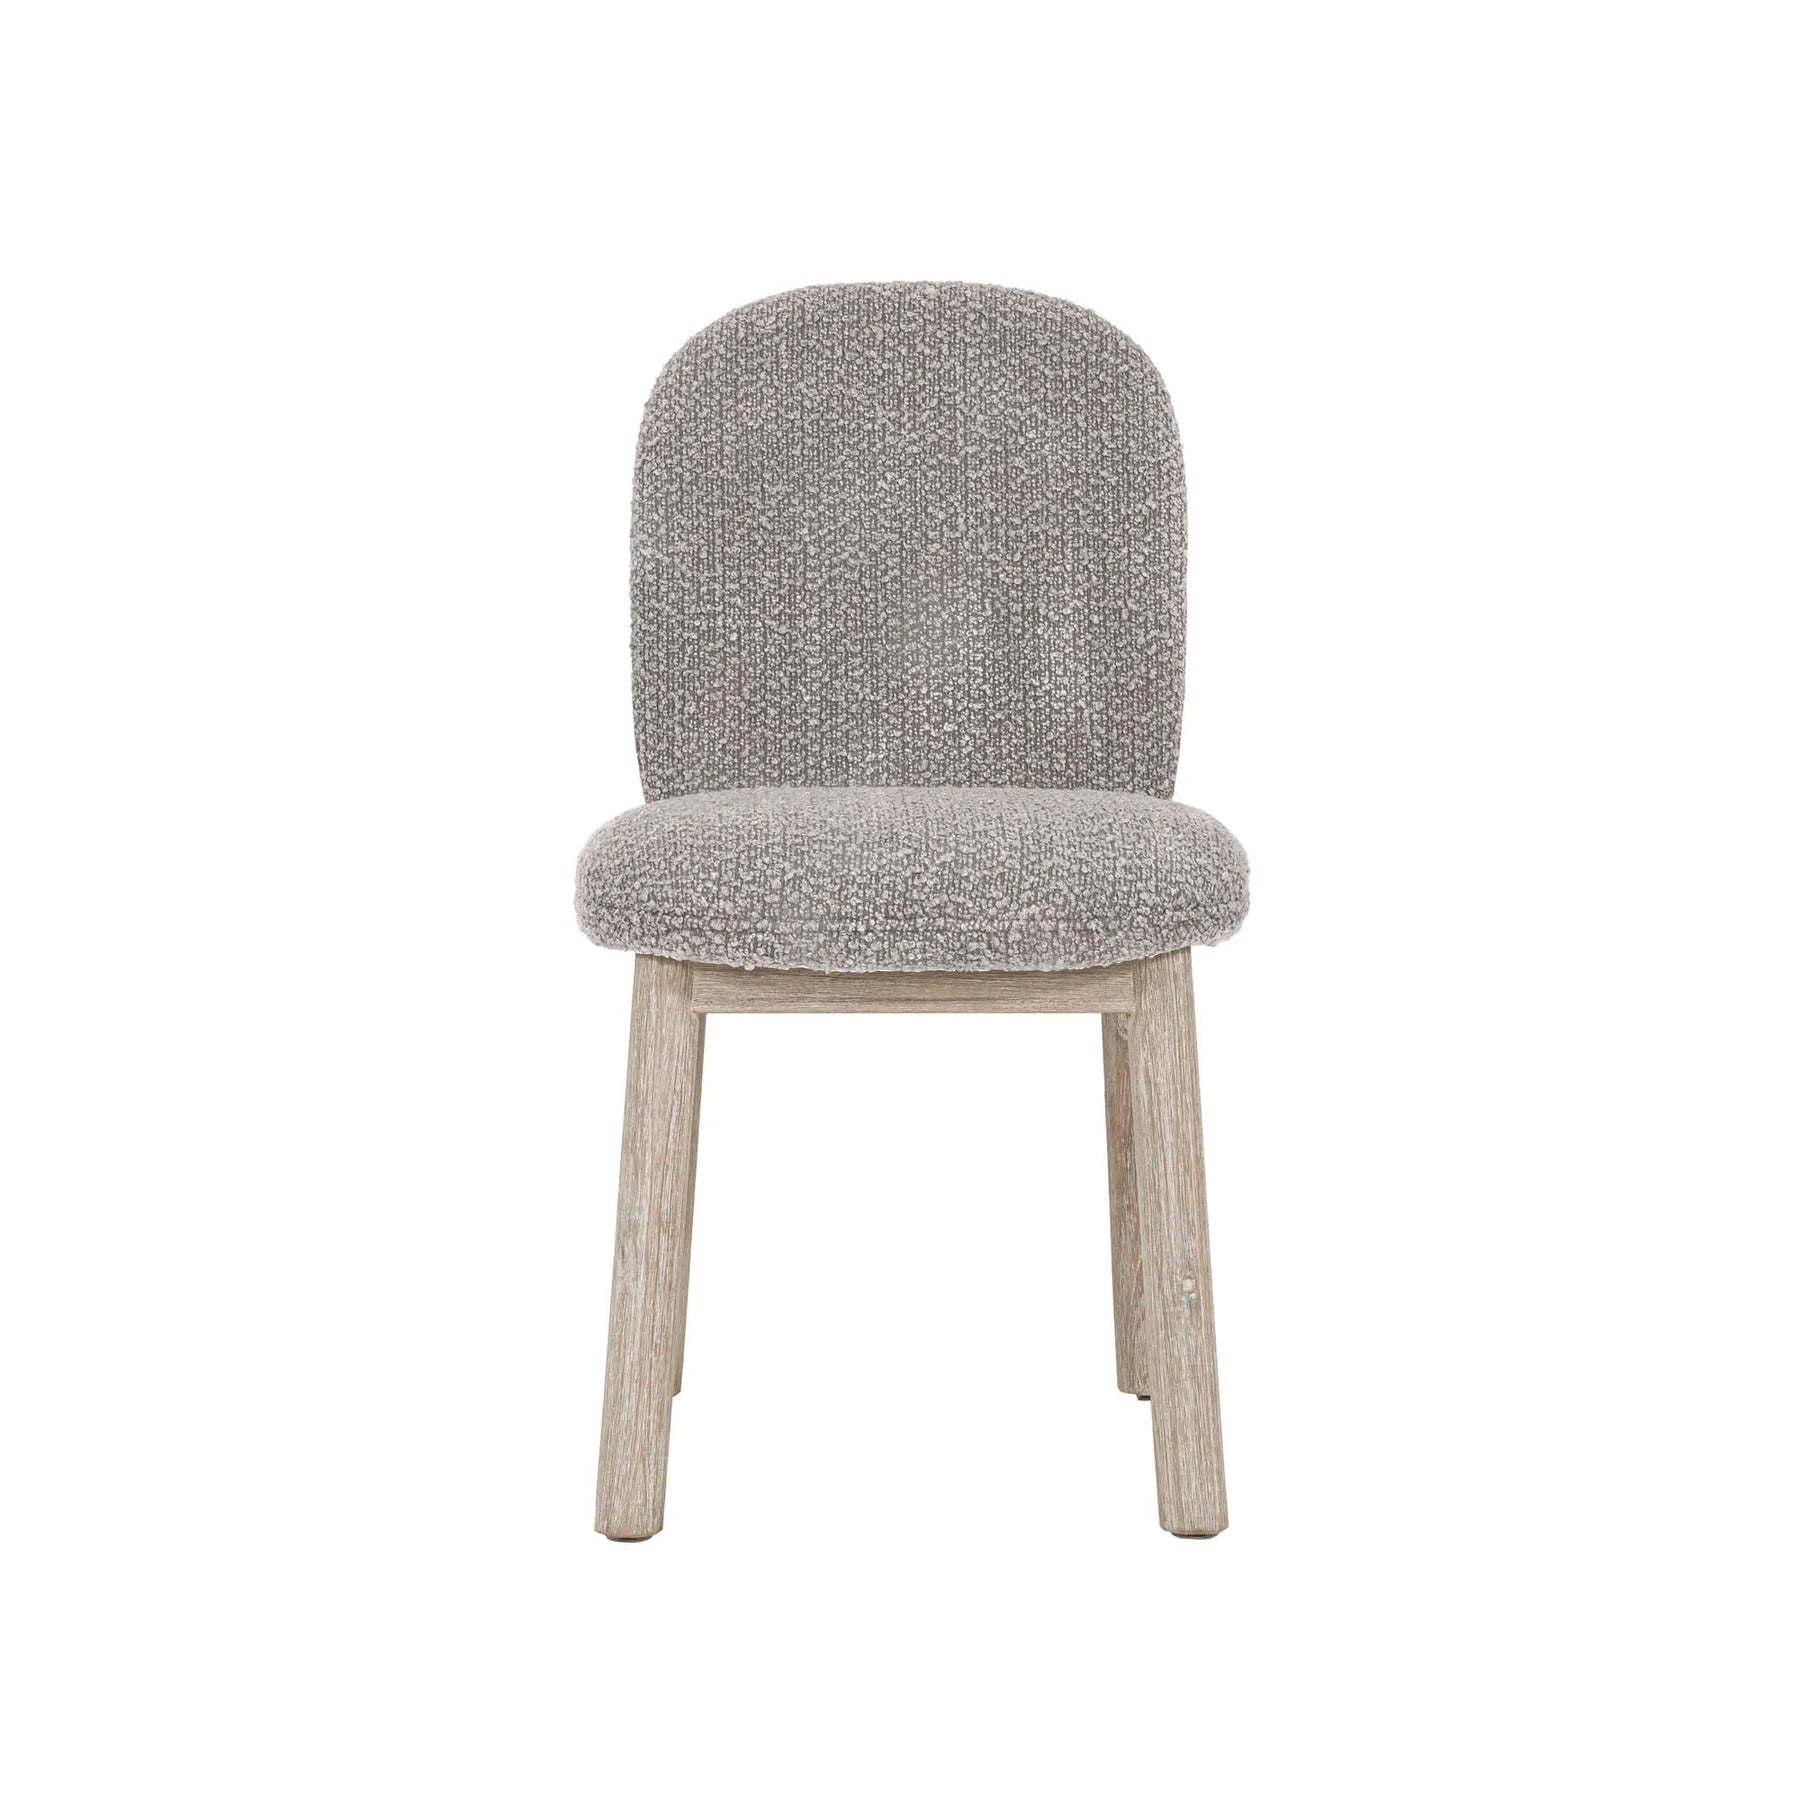 Oasis Dining Chair